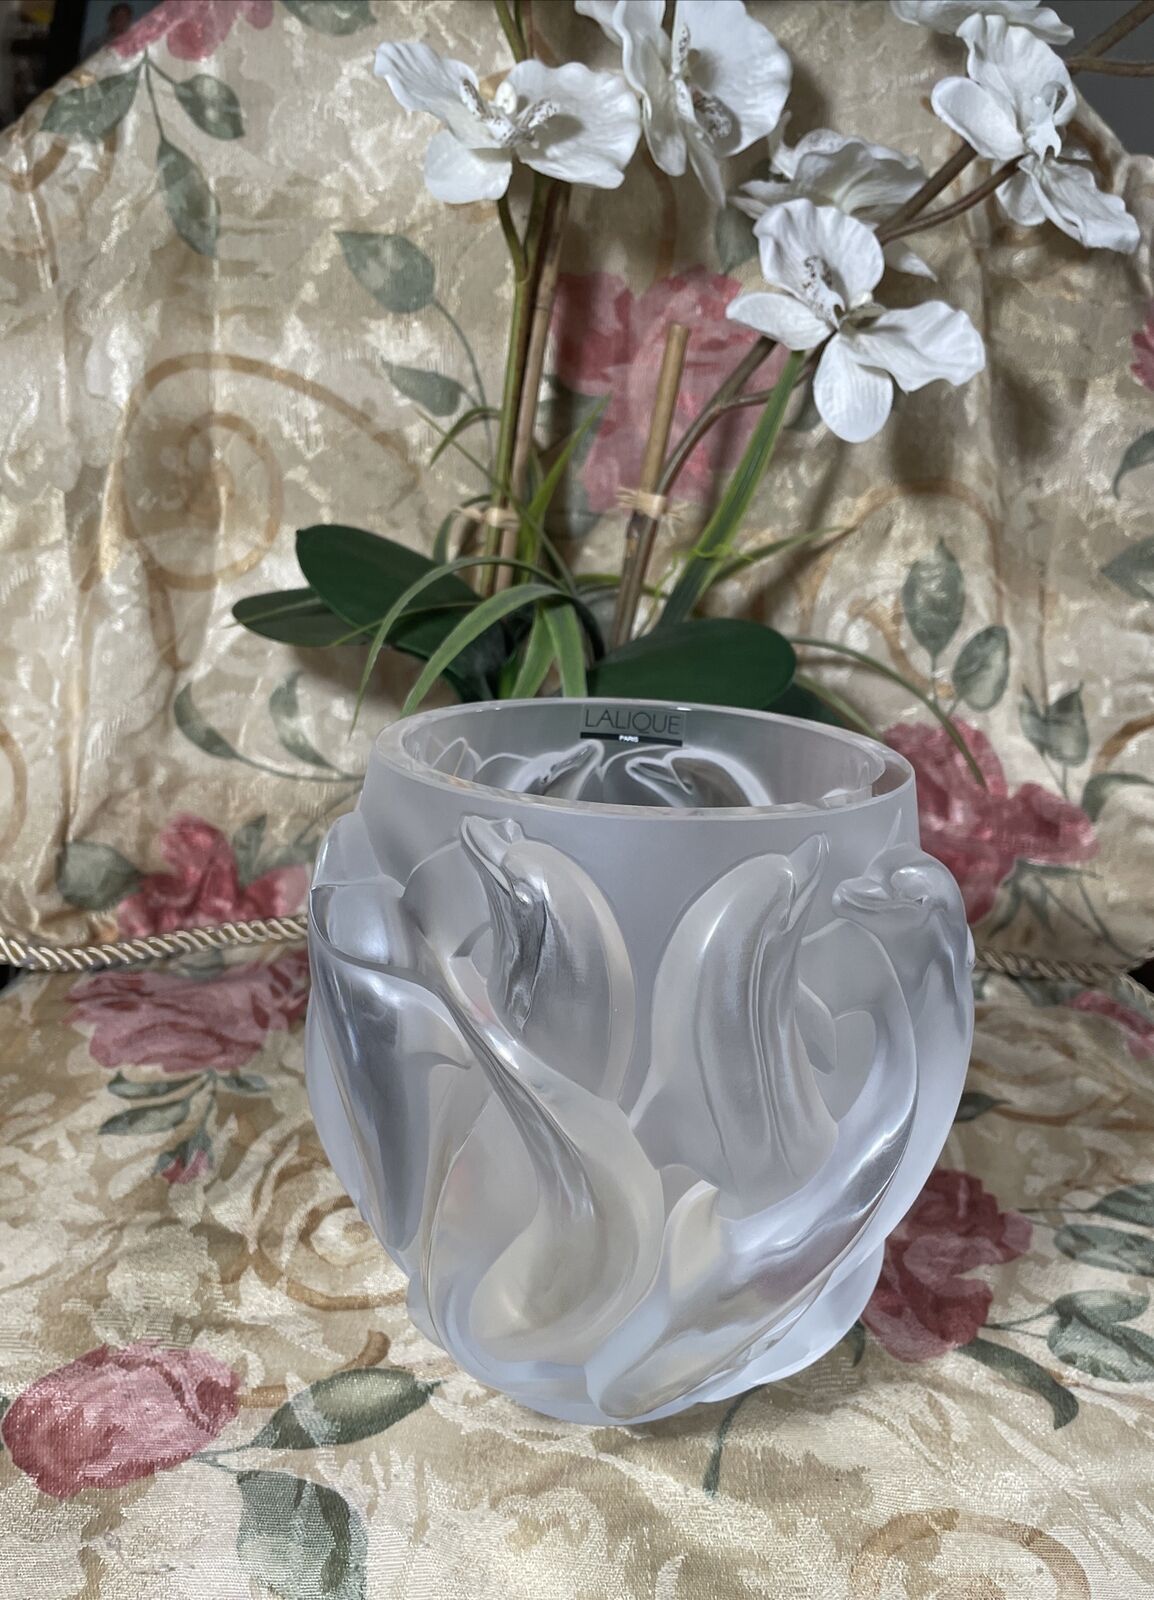 Lalique Of France Dauphin/Dolphin Oceania Vase Model #12508 Excellent Condition